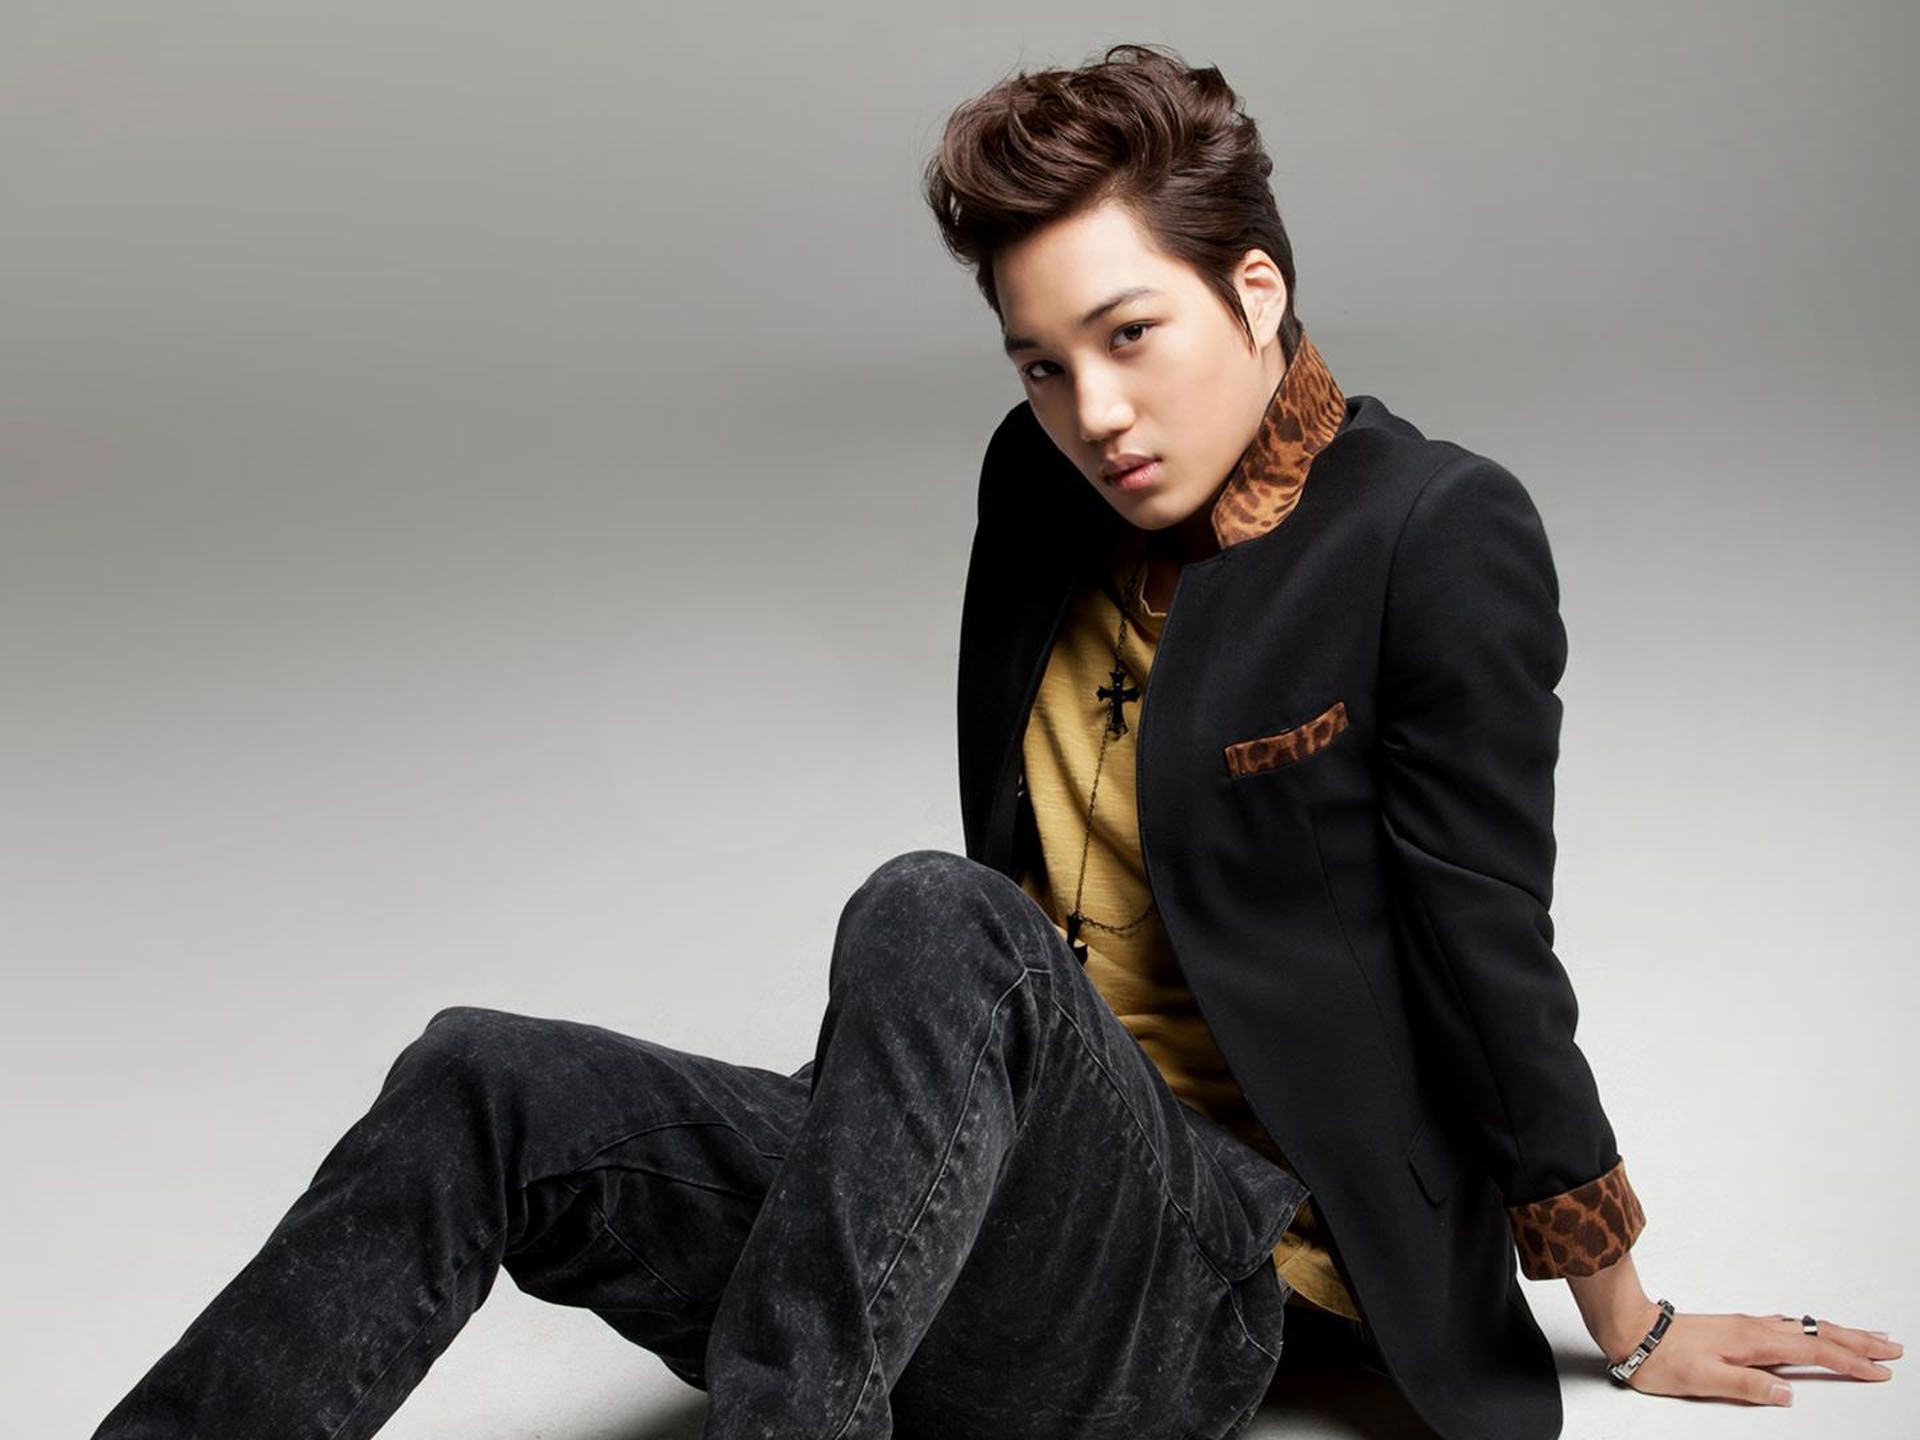 HD Wallpaper and background photos of â¥Kaiâ¥ for fans of KAI (EXO-K) images.